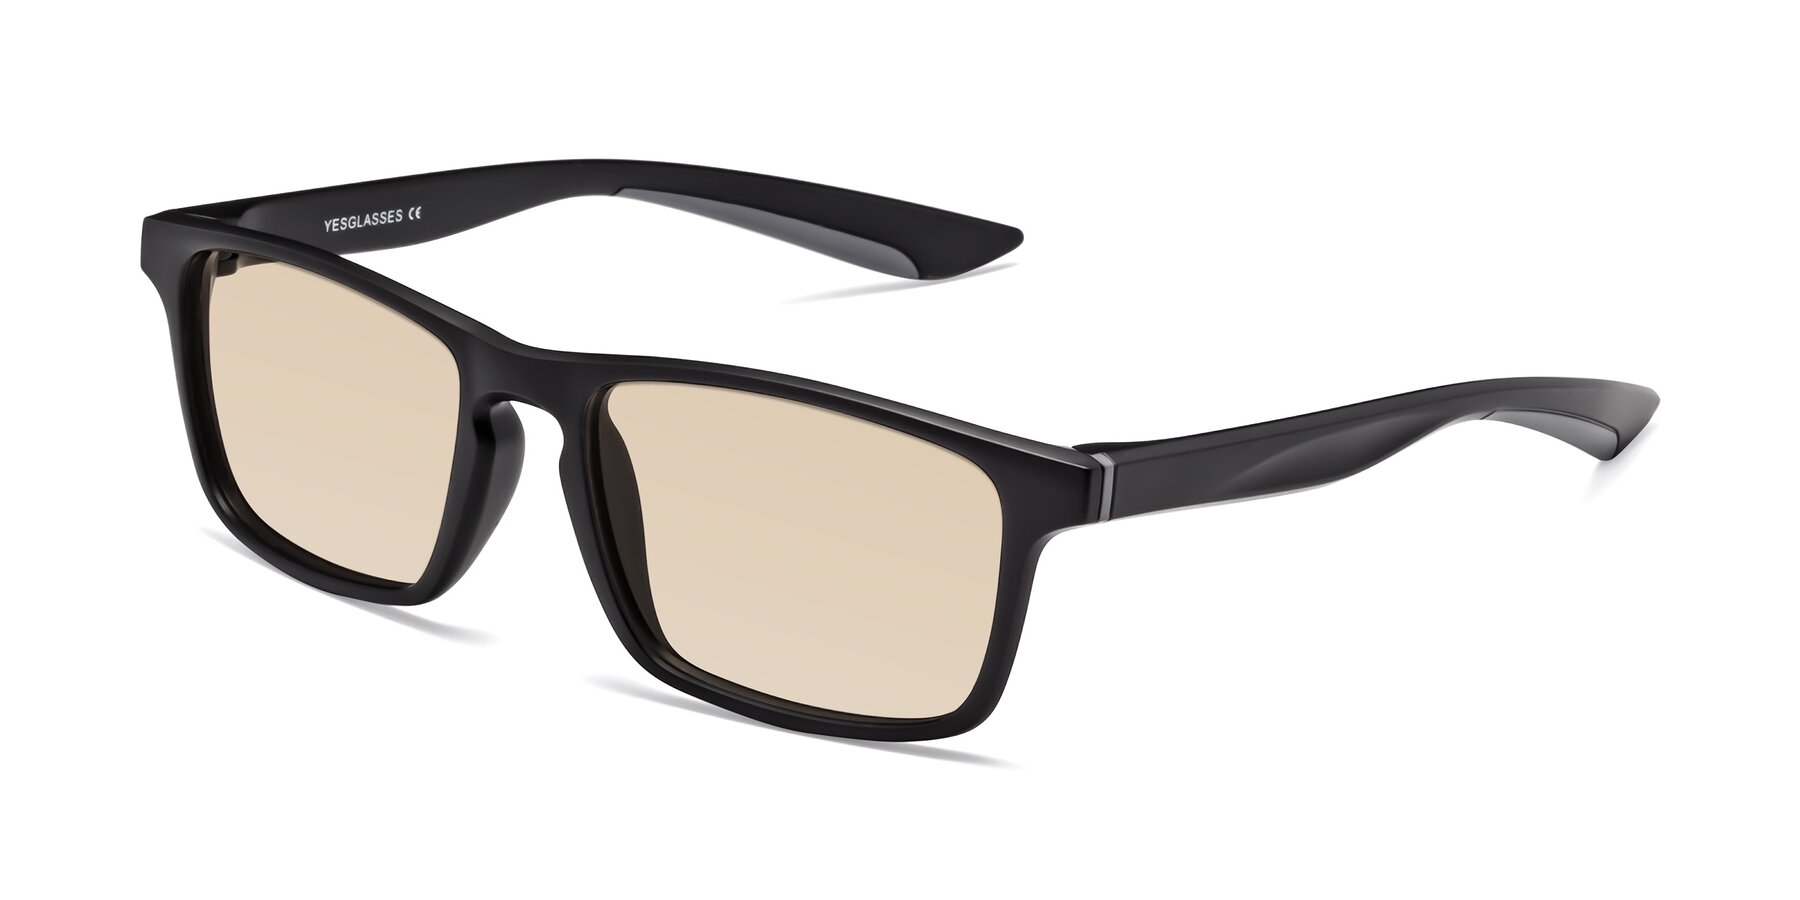 Angle of Passion in Matte Black-Gray with Light Brown Tinted Lenses